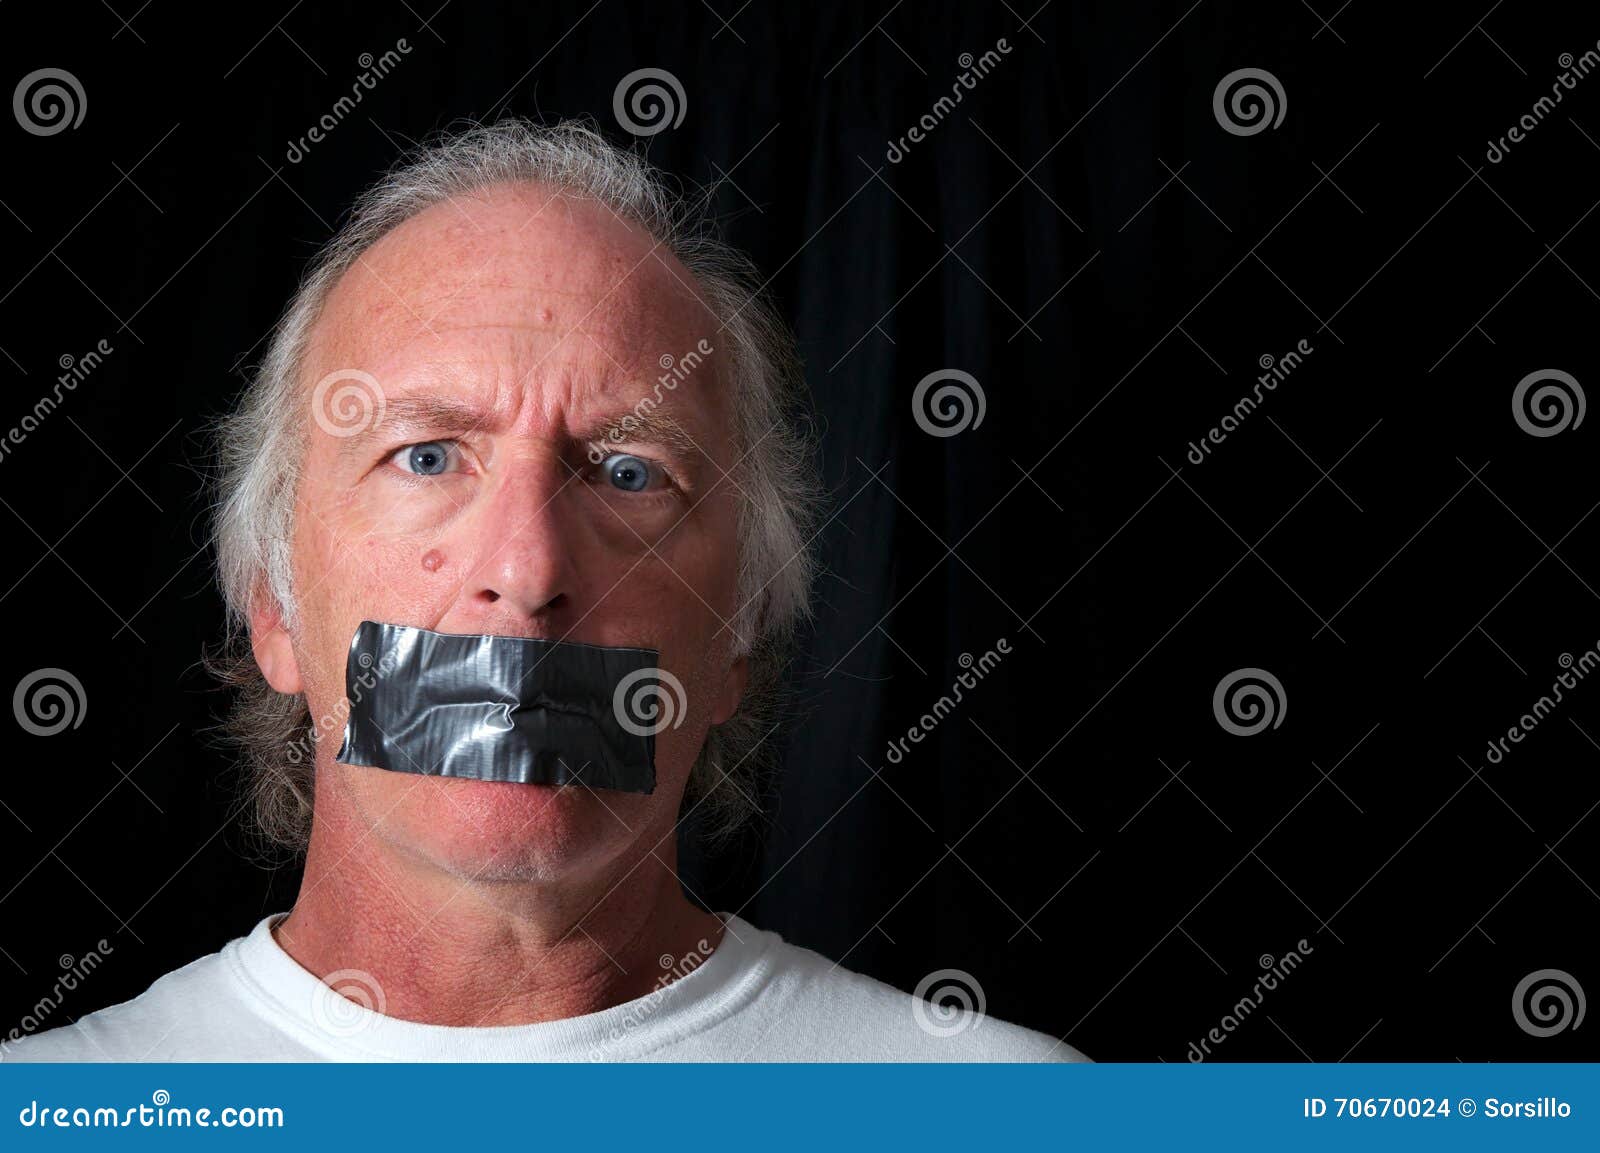 wide eyed man with duct taped mouth